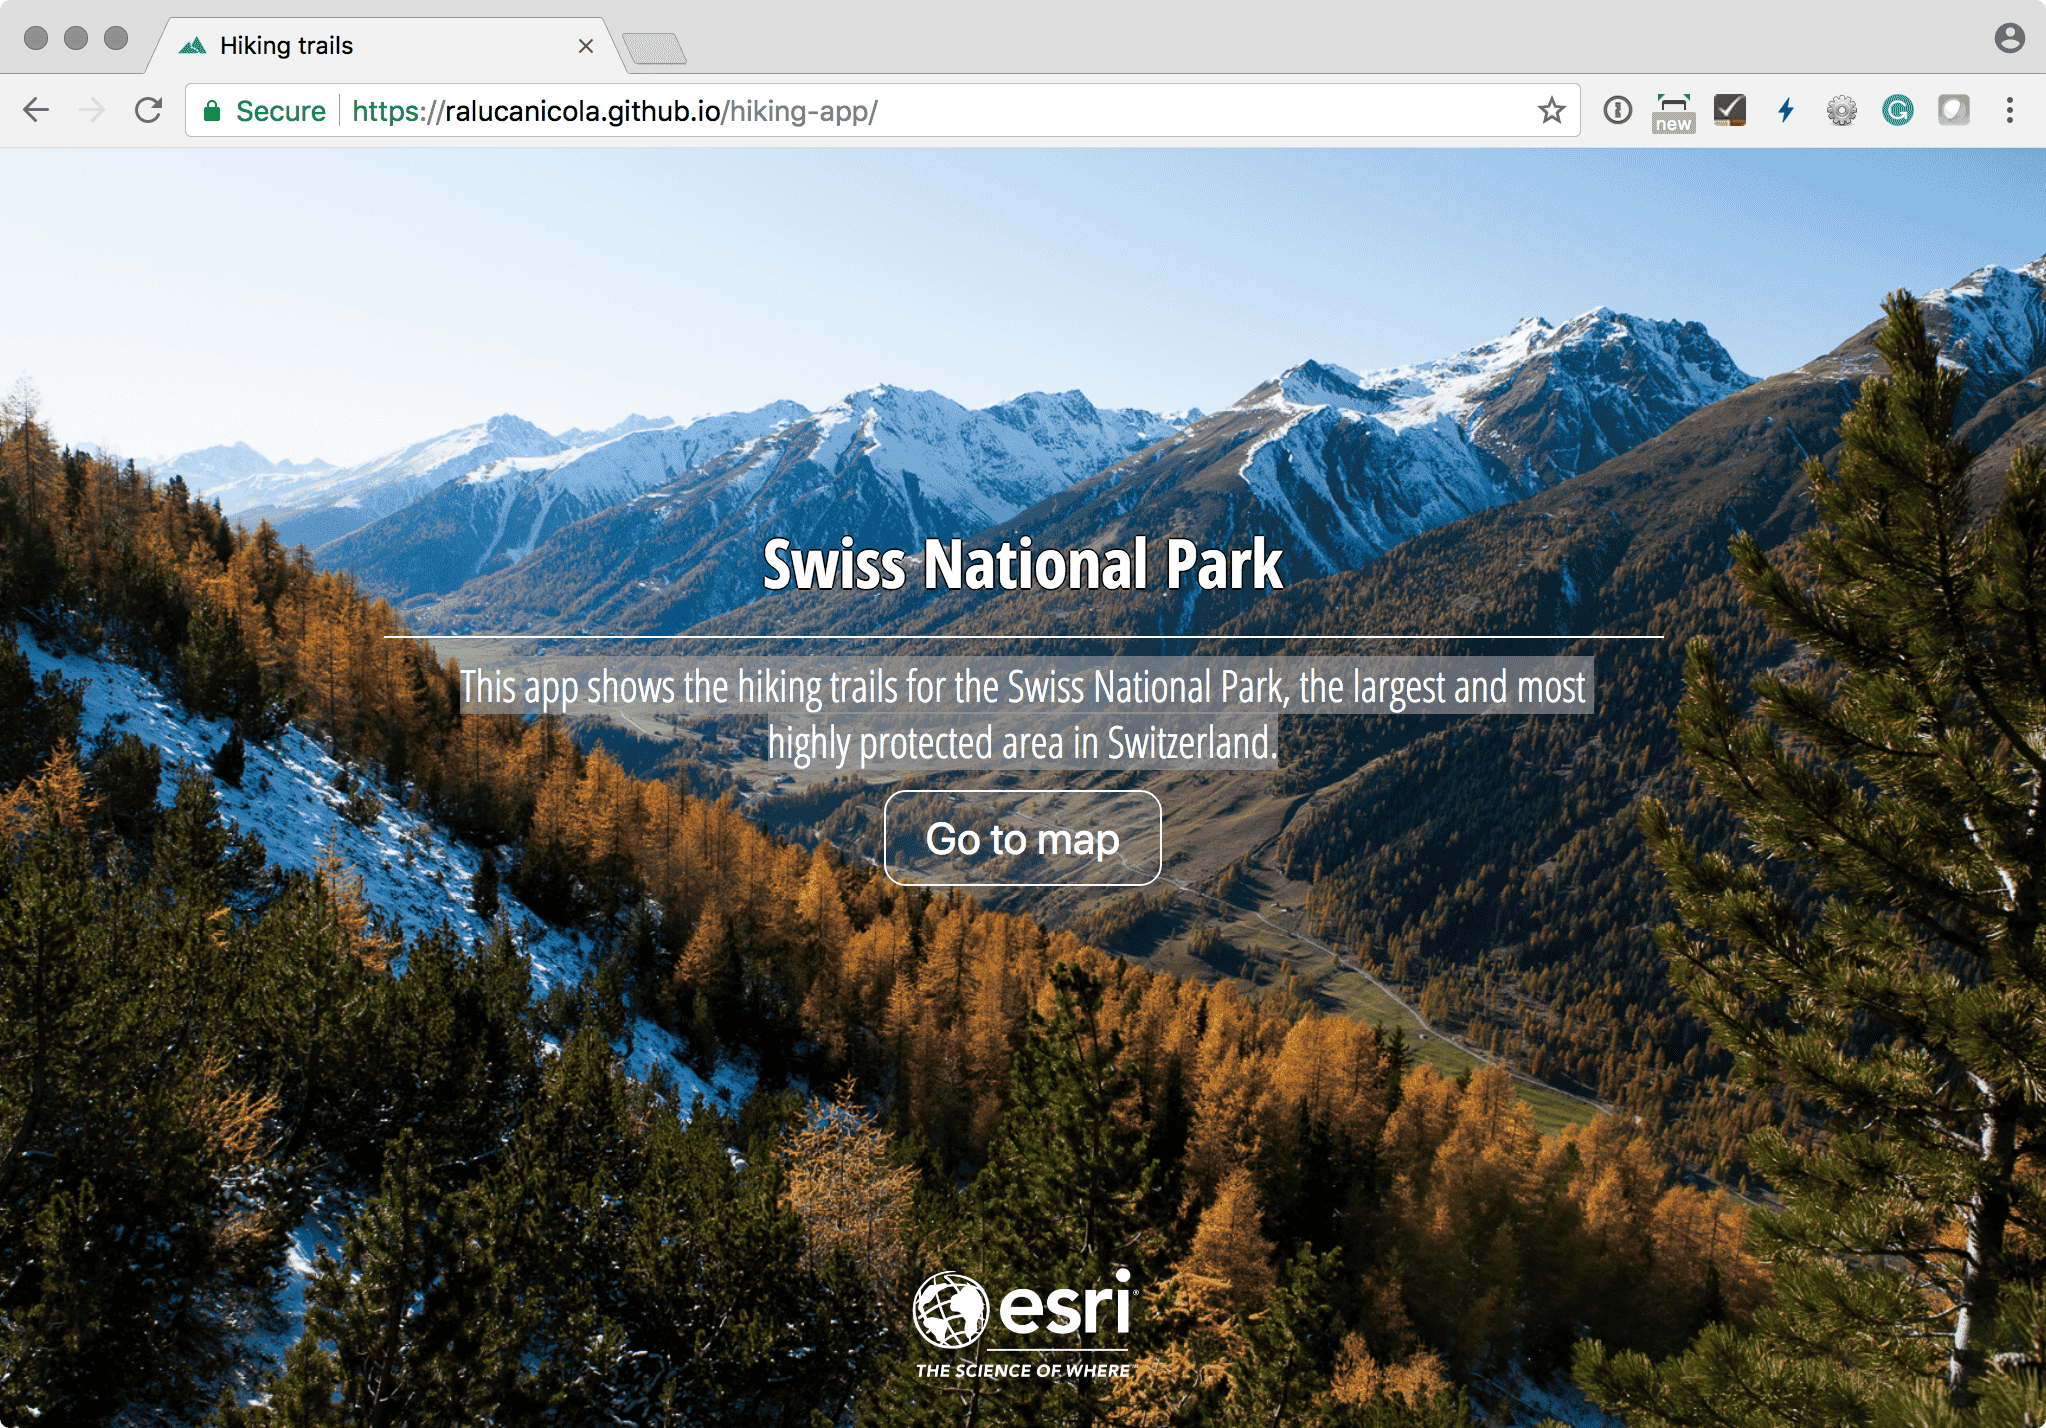 Hiking trails in Swiss National Park